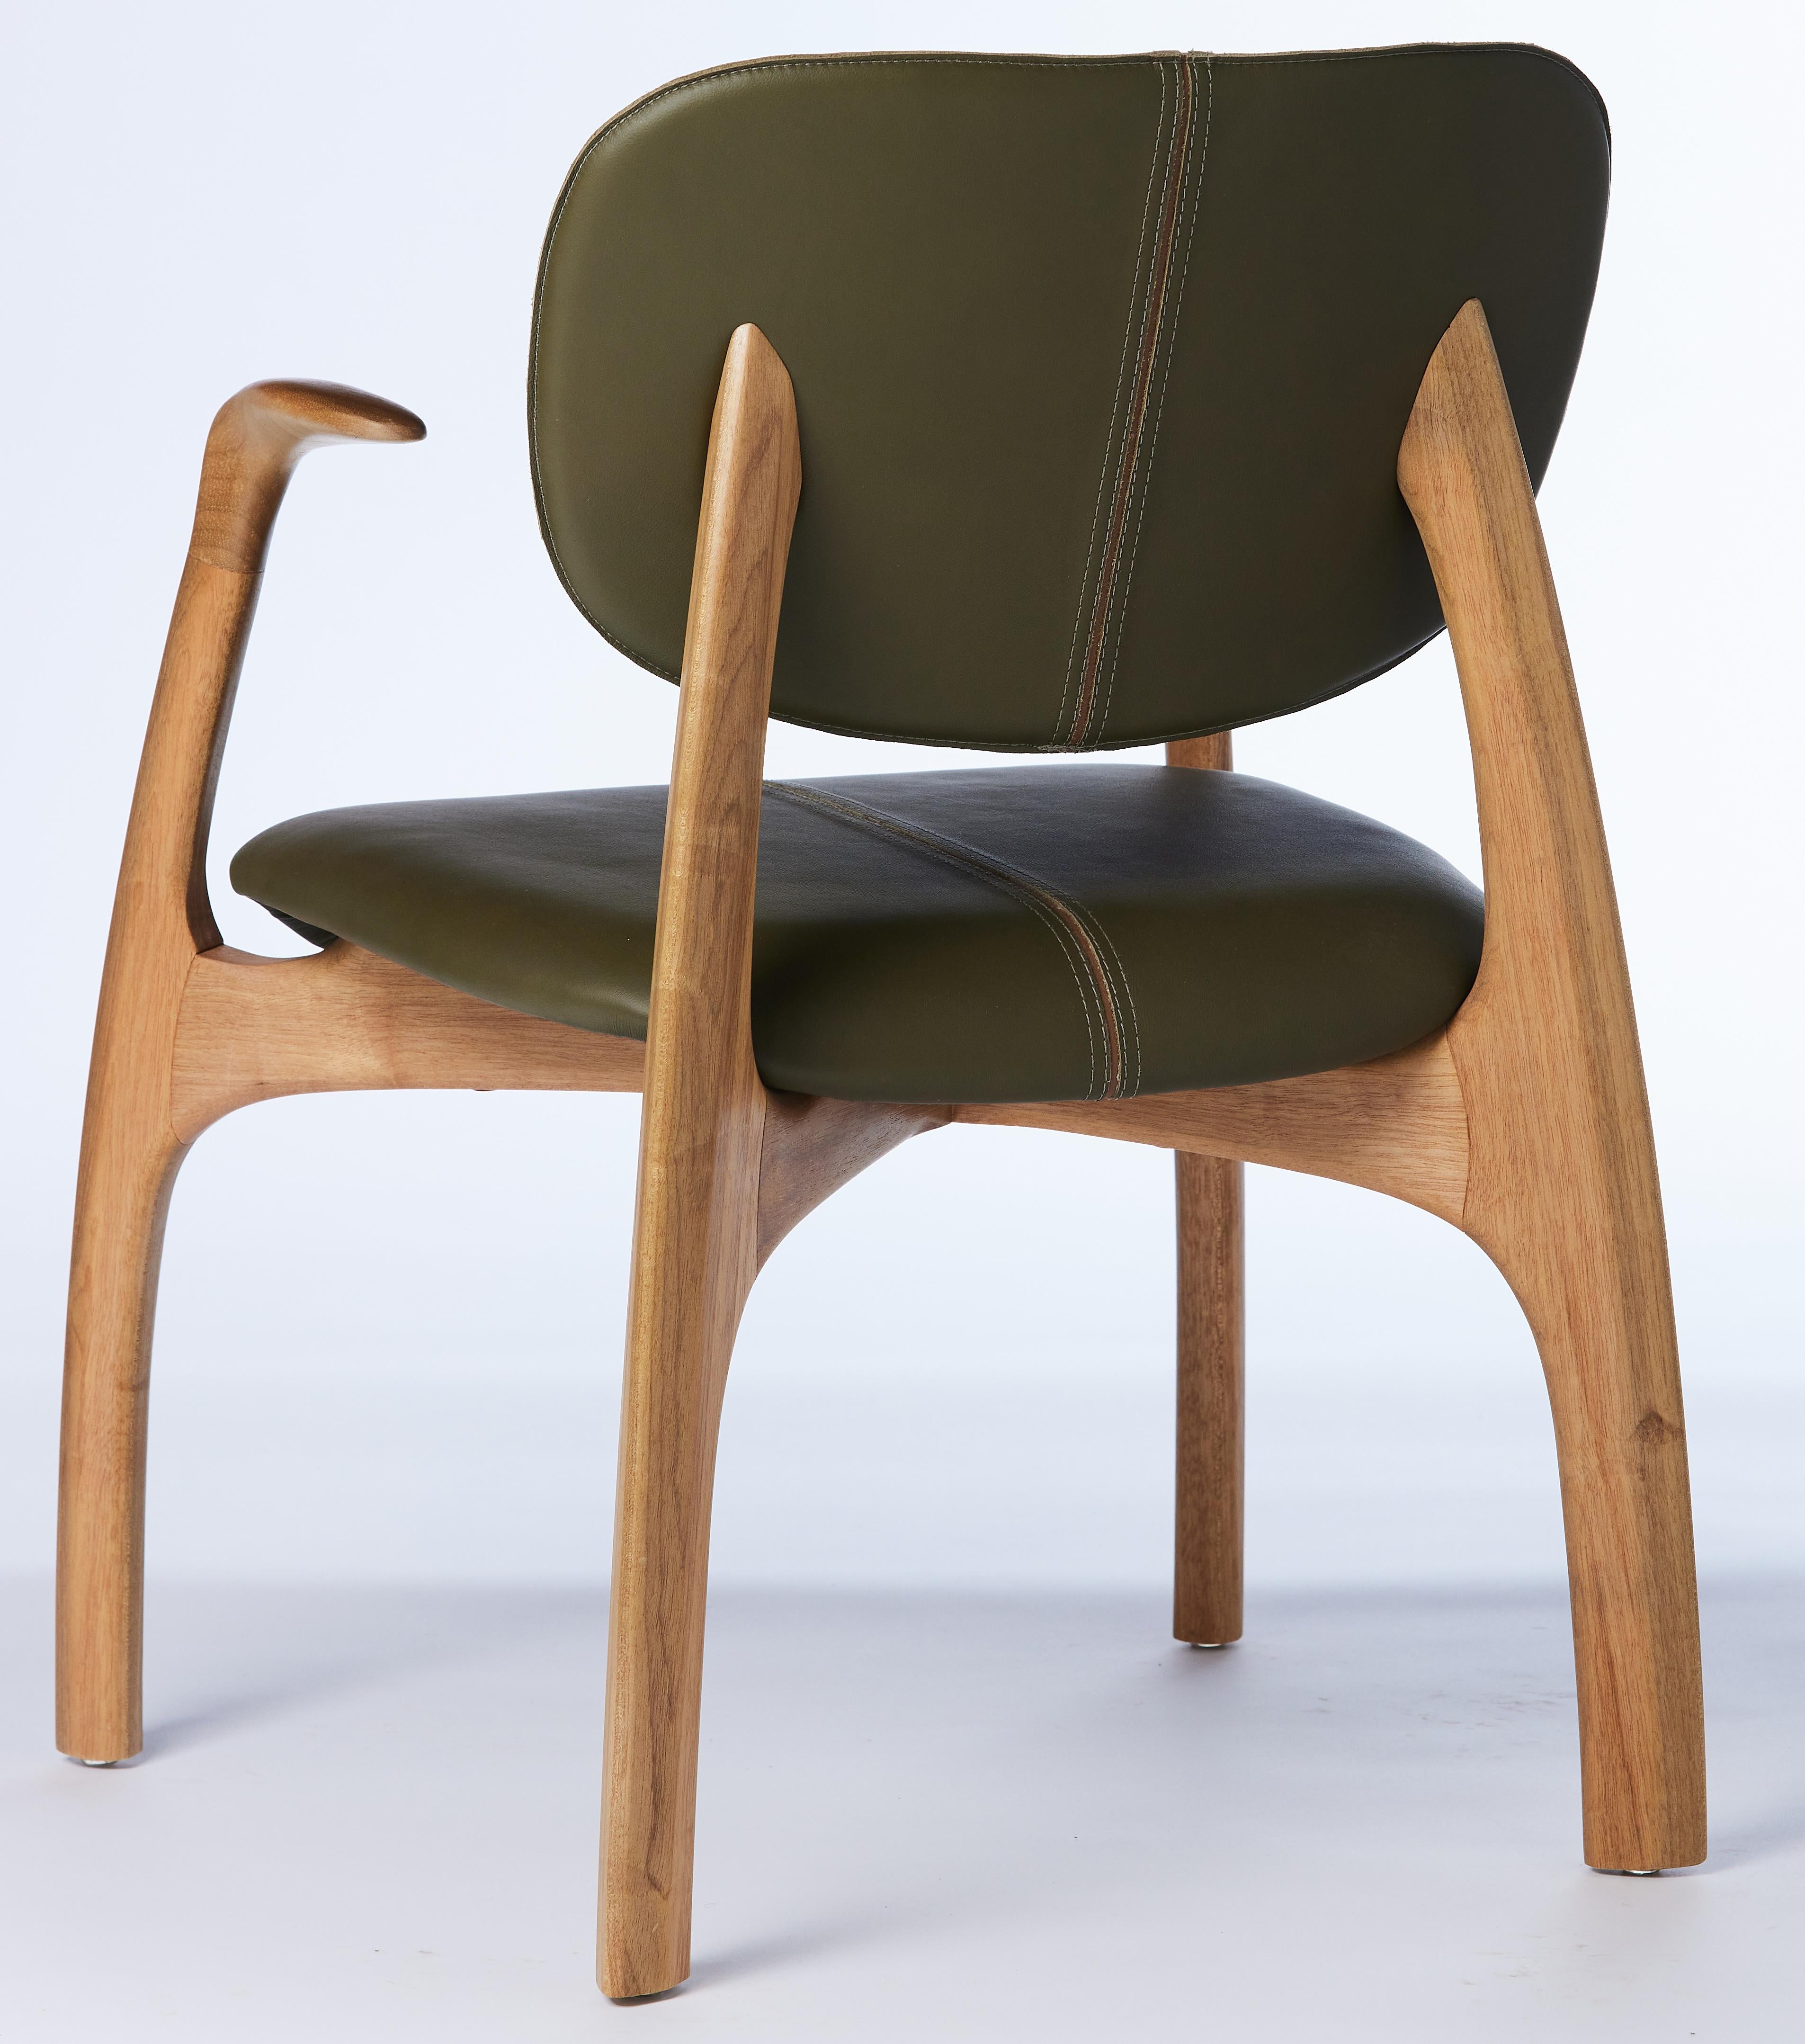 Surf Brazilian Contemporary Wood and Fabric Chair with Arms by Lattoog In New Condition For Sale In Sao Paolo, BR